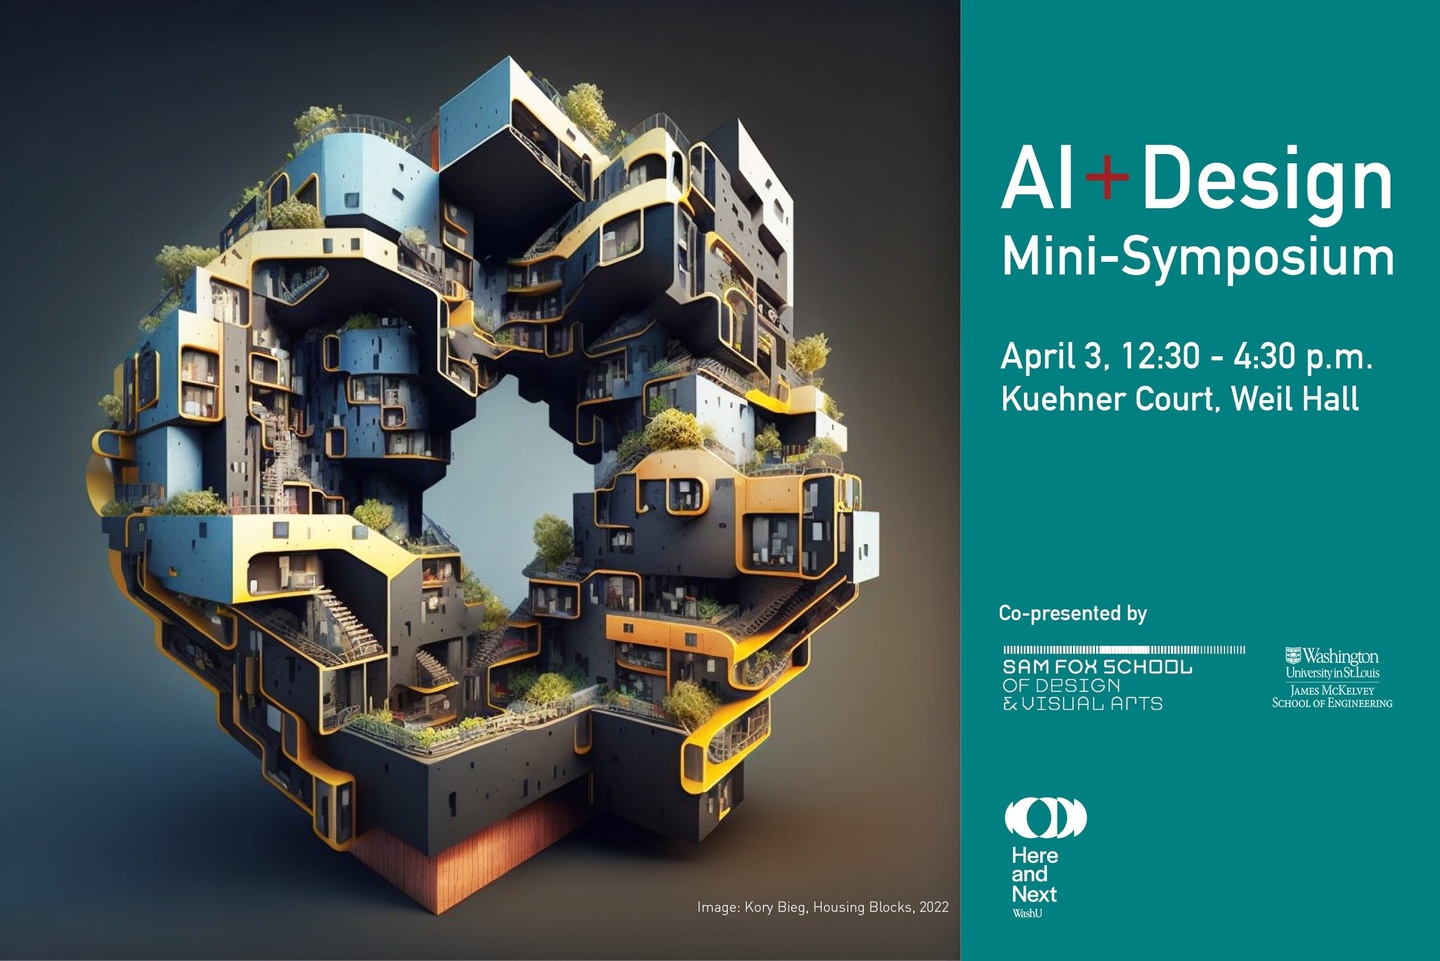 AI + Design Mini Symposium Poster with image of buildings stacked together creating a circle and event details